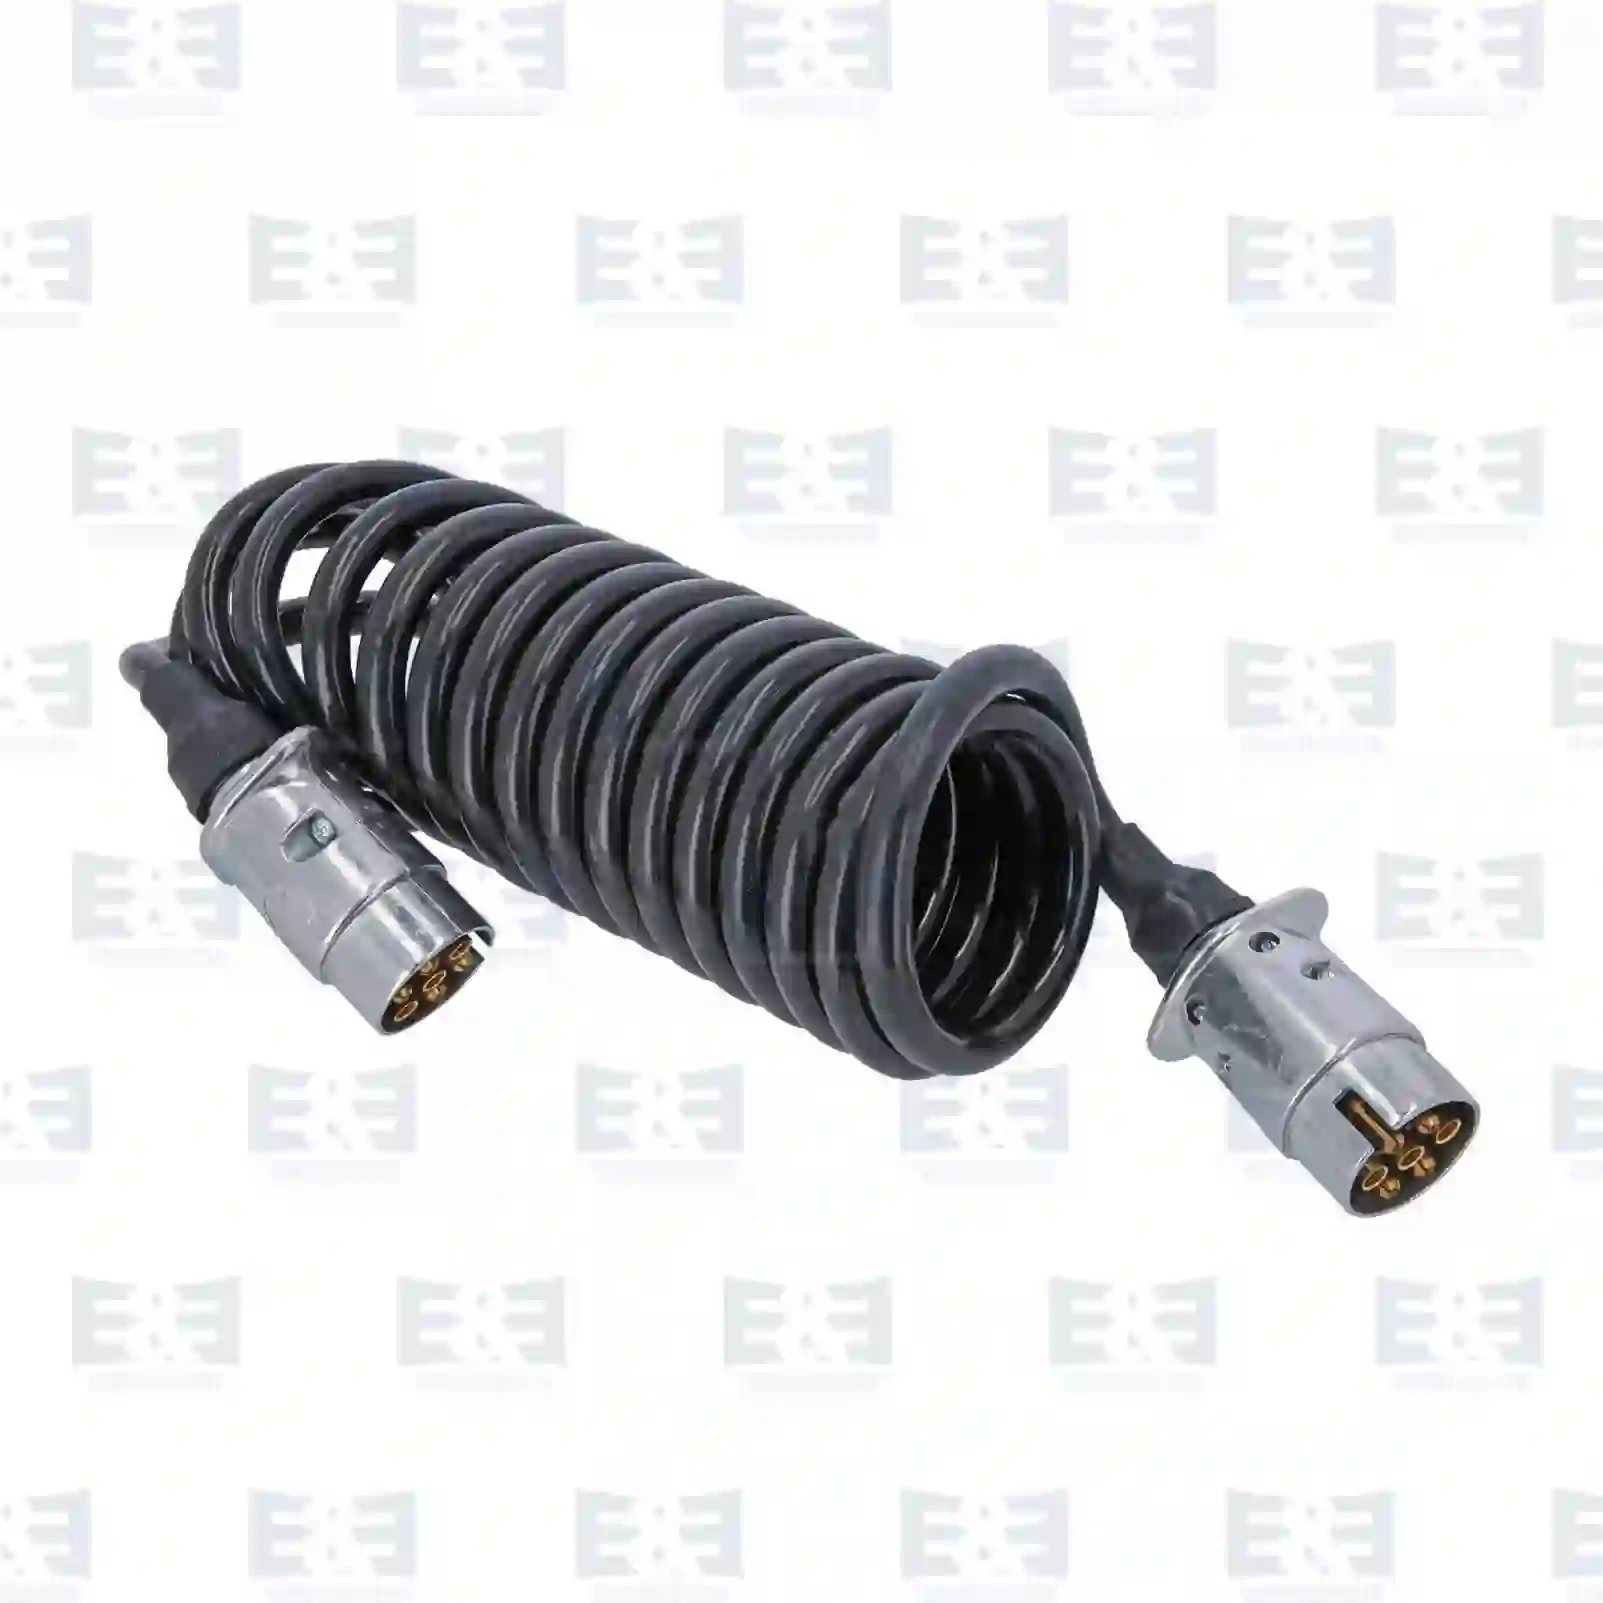 Electrical Equipment Electrical coil, EE No 2E2286435 ,  oem no:0566966, 0566970, 1343814, 1602542, 566966, 566970, 3875400039 E&E Truck Spare Parts | Truck Spare Parts, Auotomotive Spare Parts